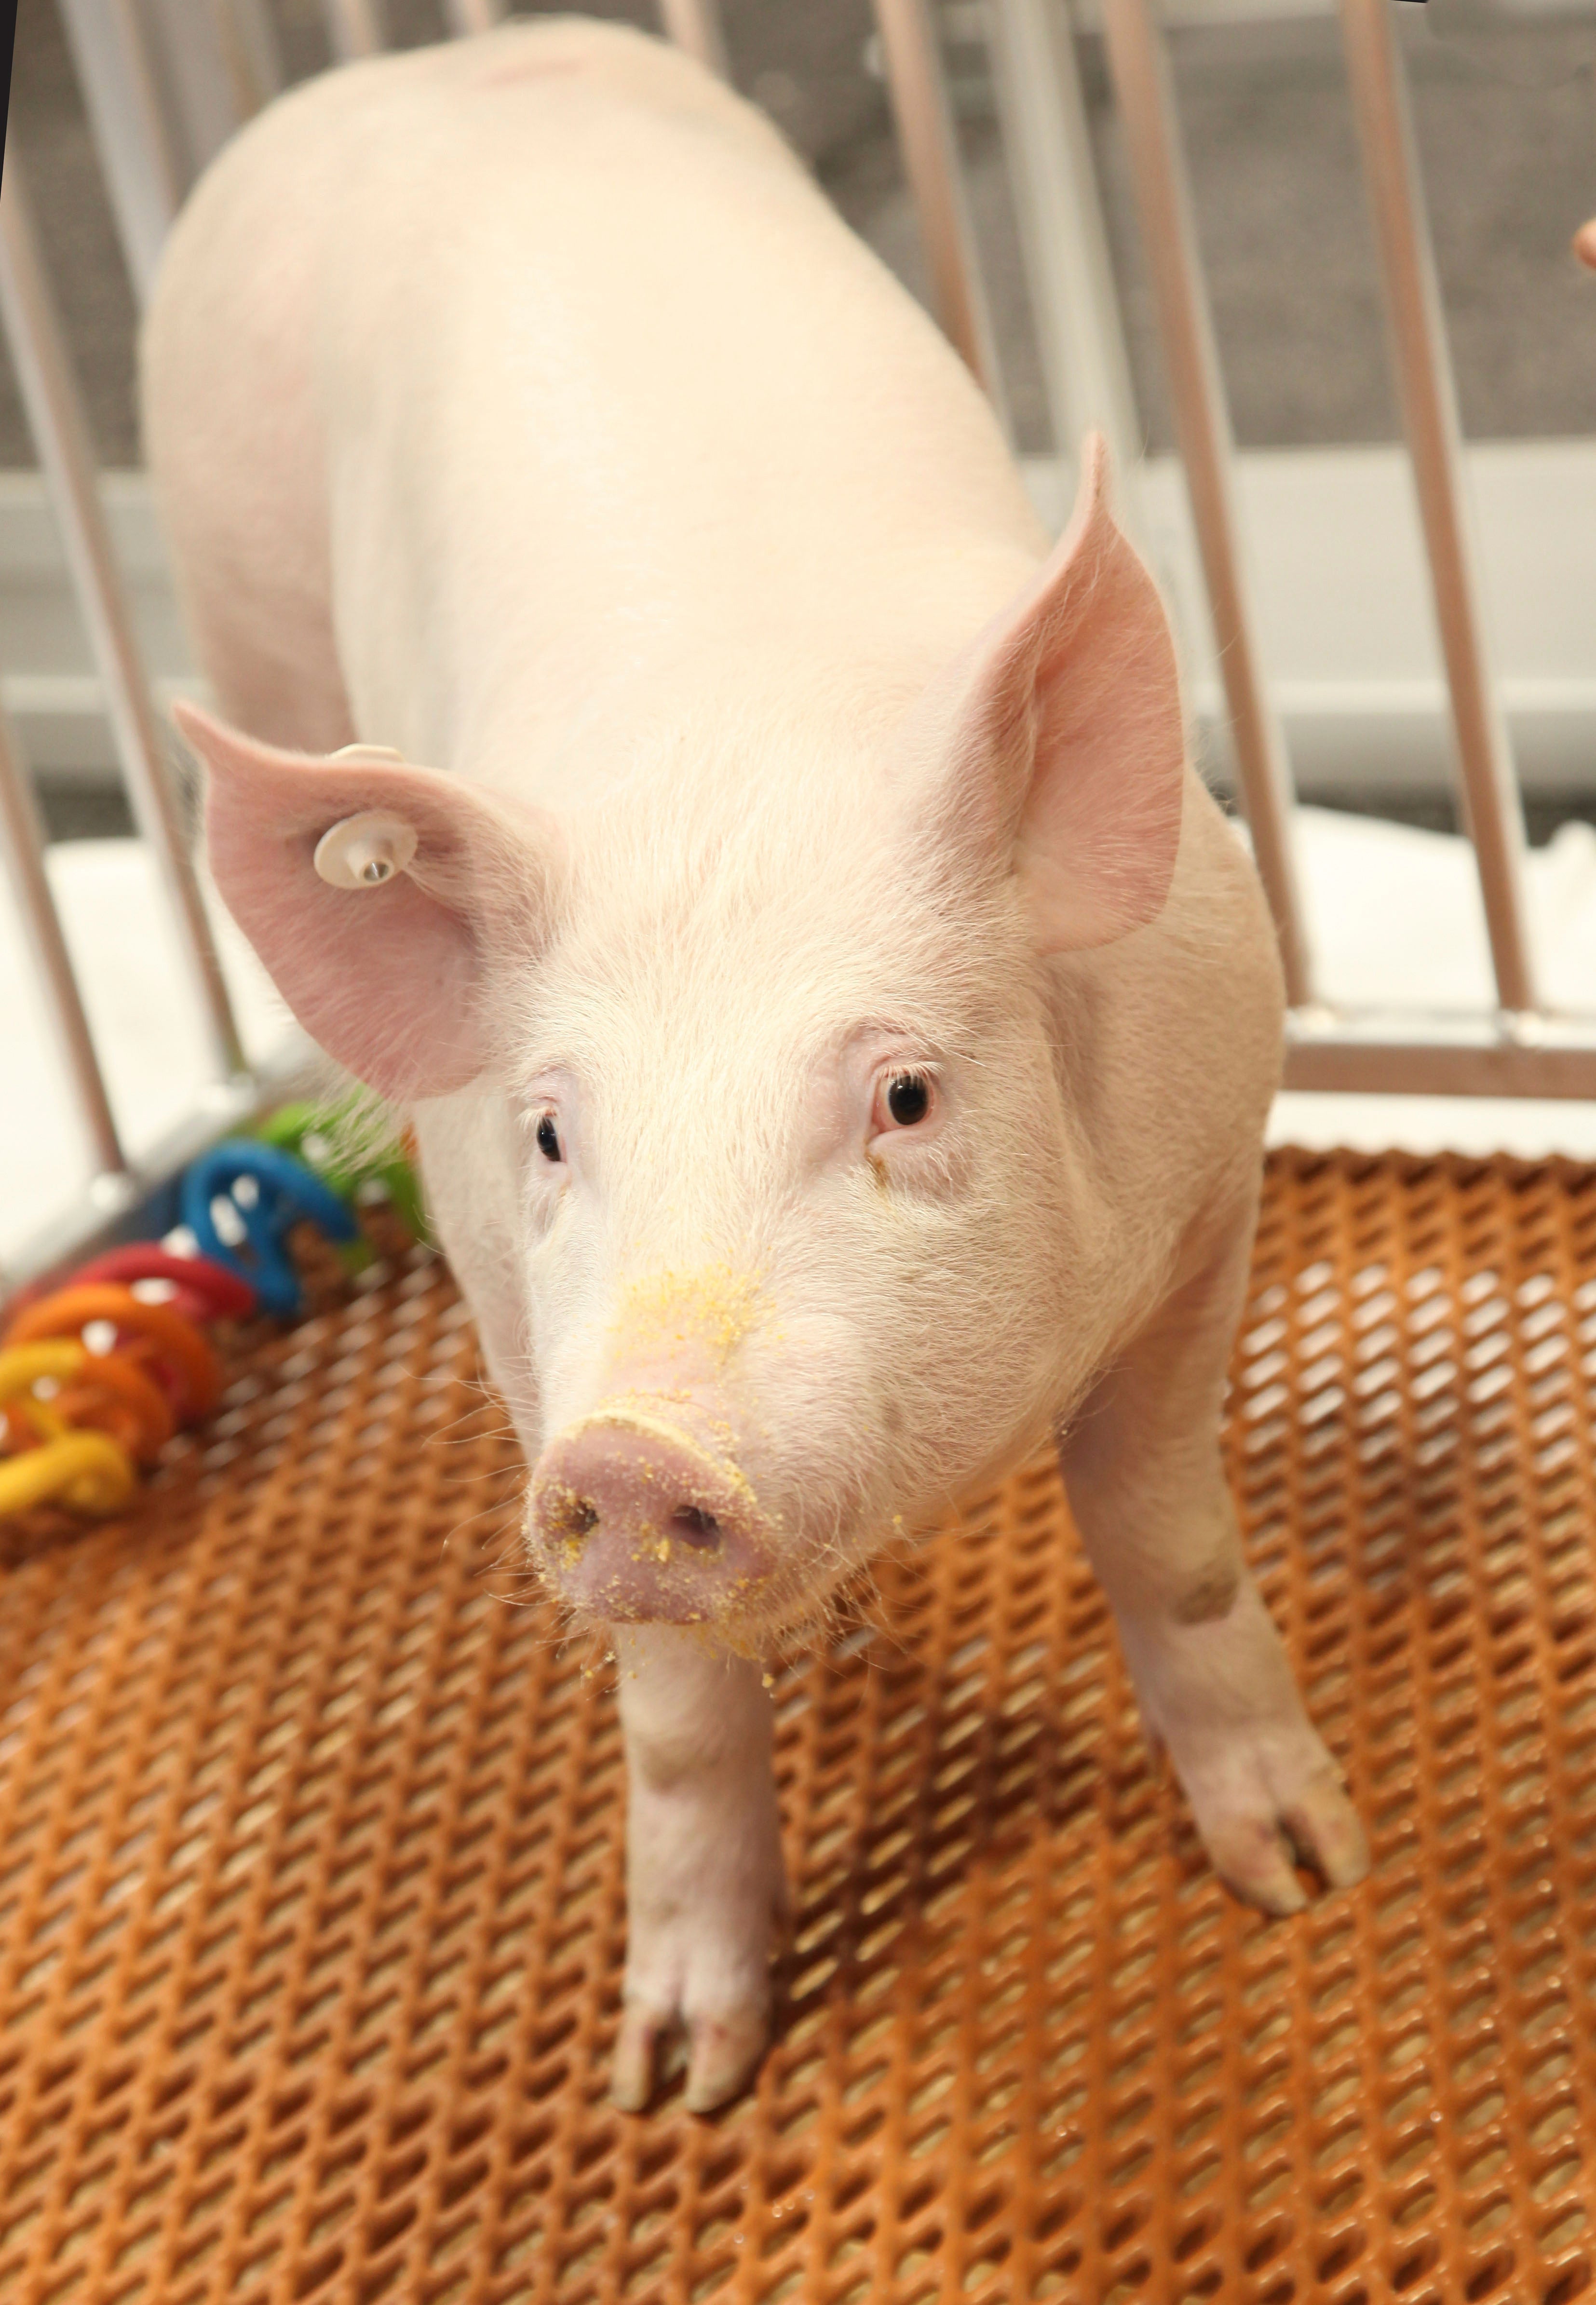 File: One of the ‘GalSafe’ pigs which was genetically engineered to eliminate a sugar molecule in pig cells, foreign to the human body. A kidney from one of these pigs was used in the transplant test